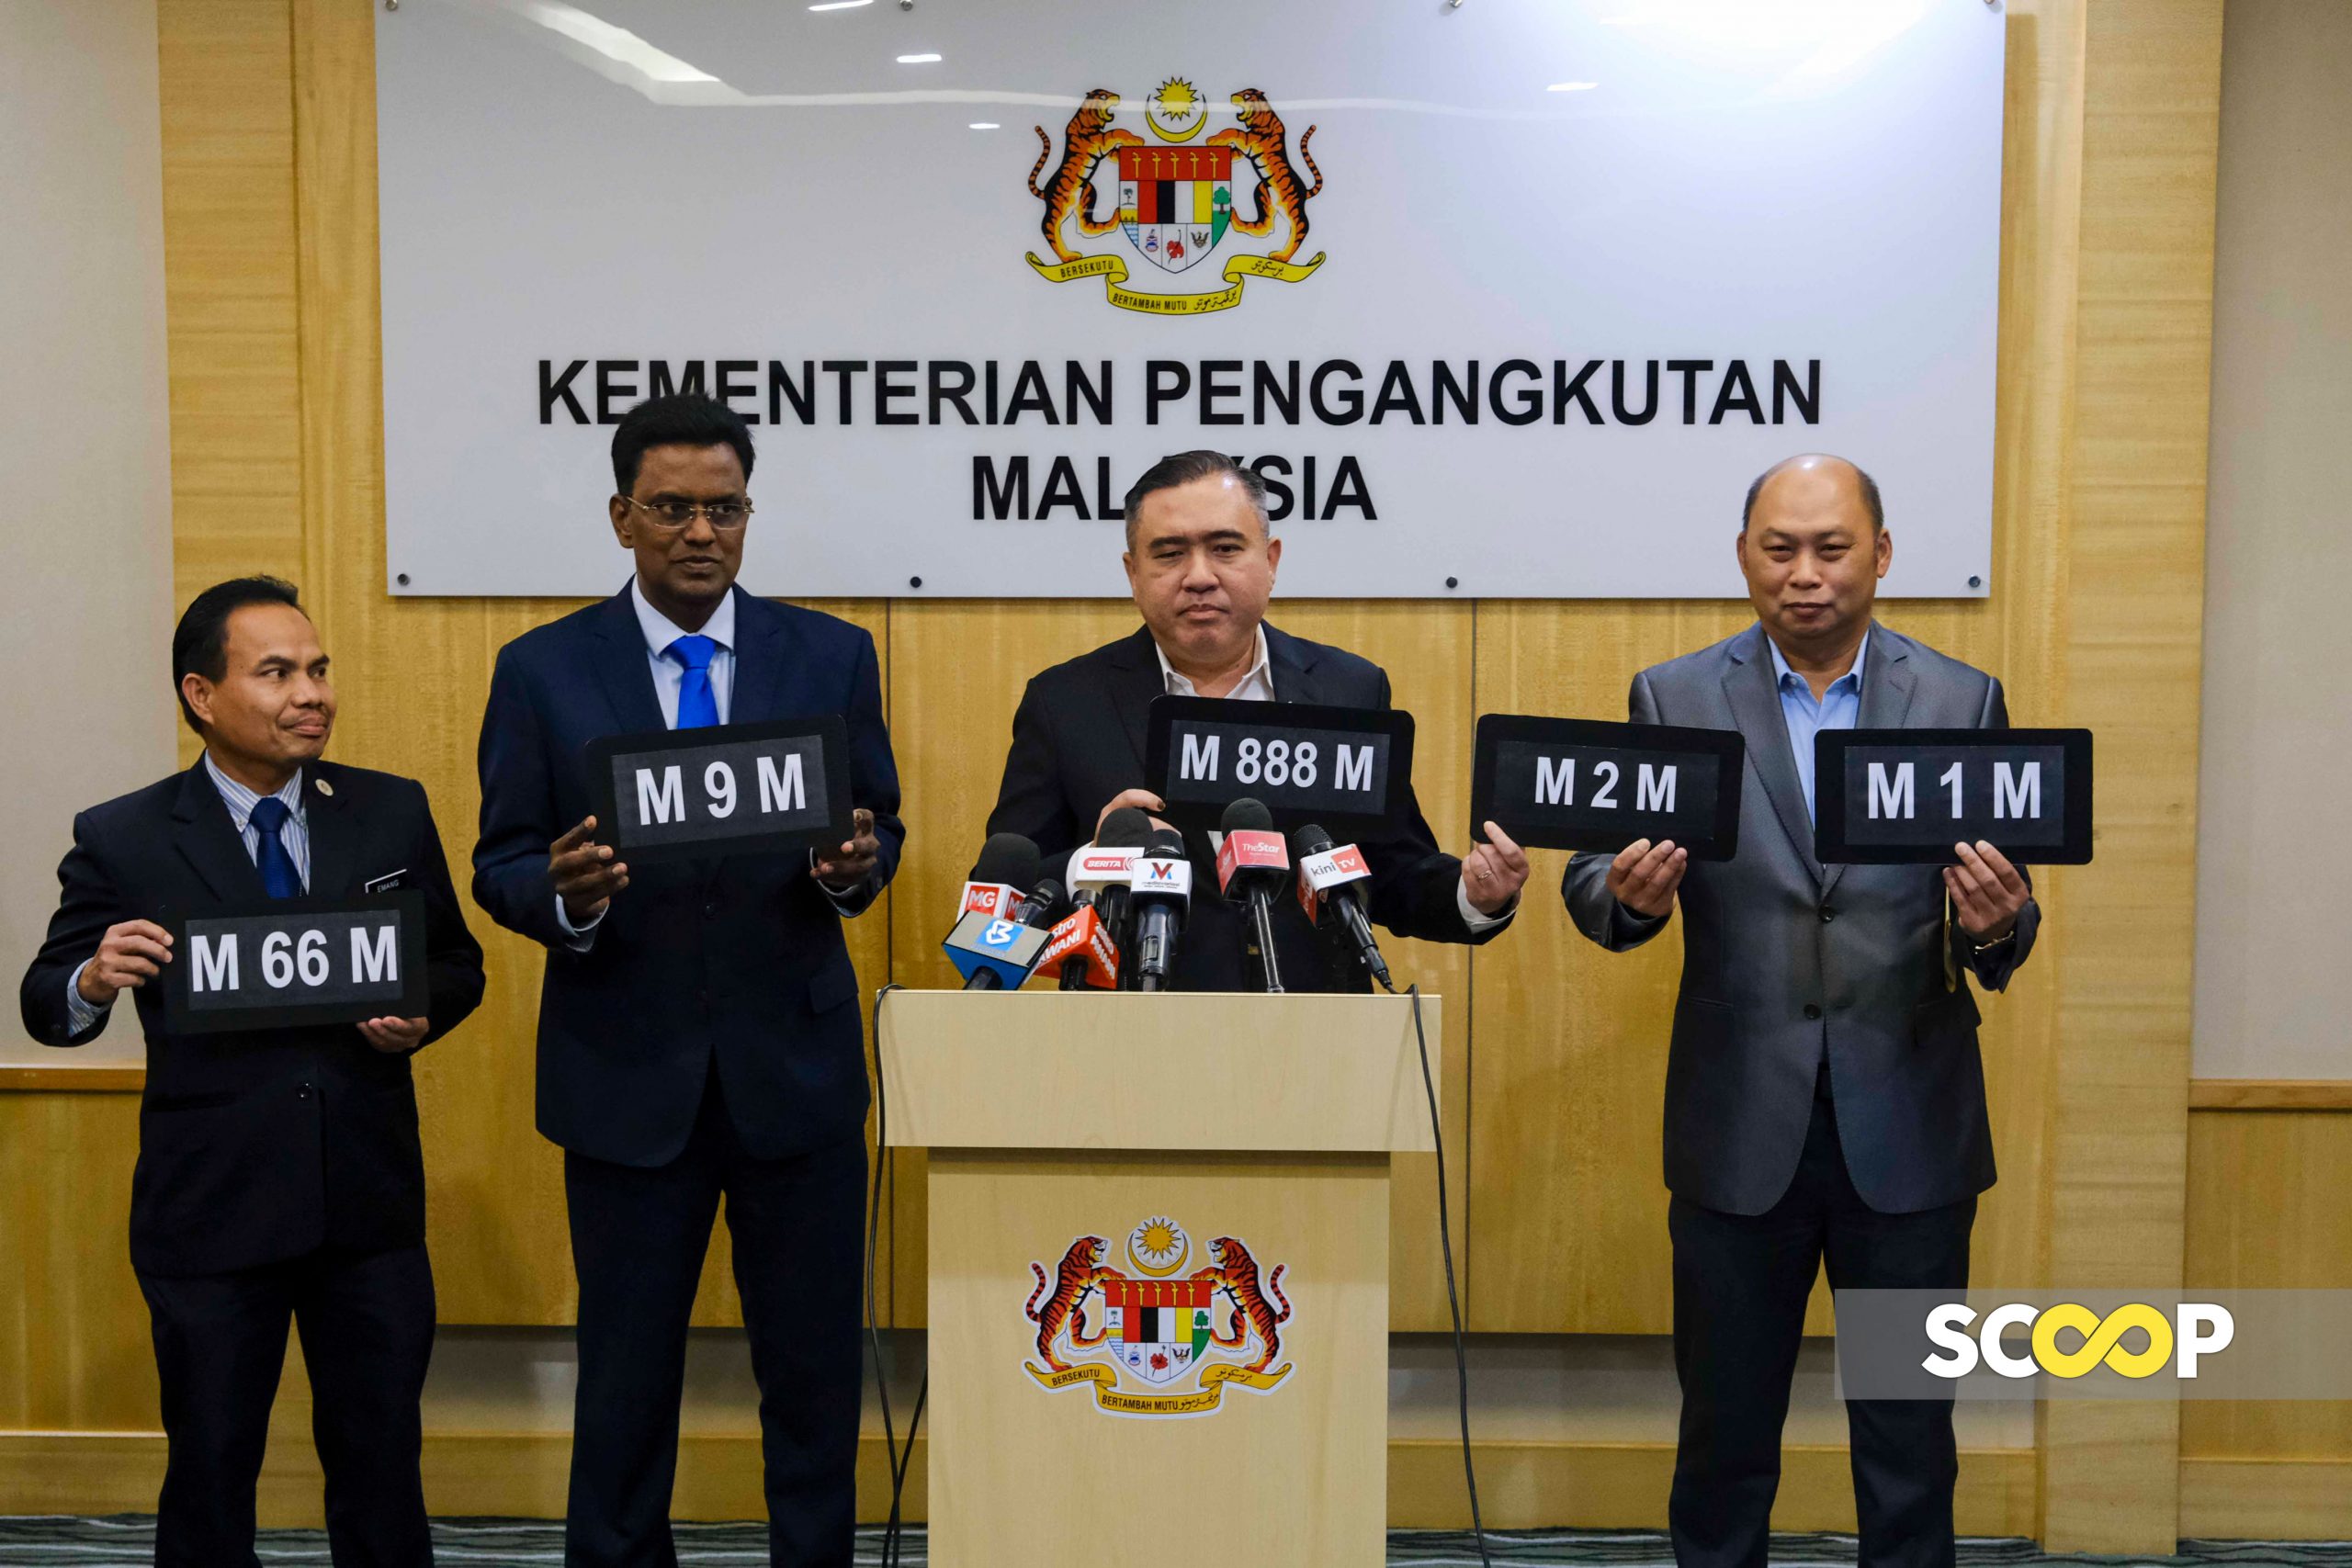 Bid for ‘M1M’ plate number over RM500,000 on first day